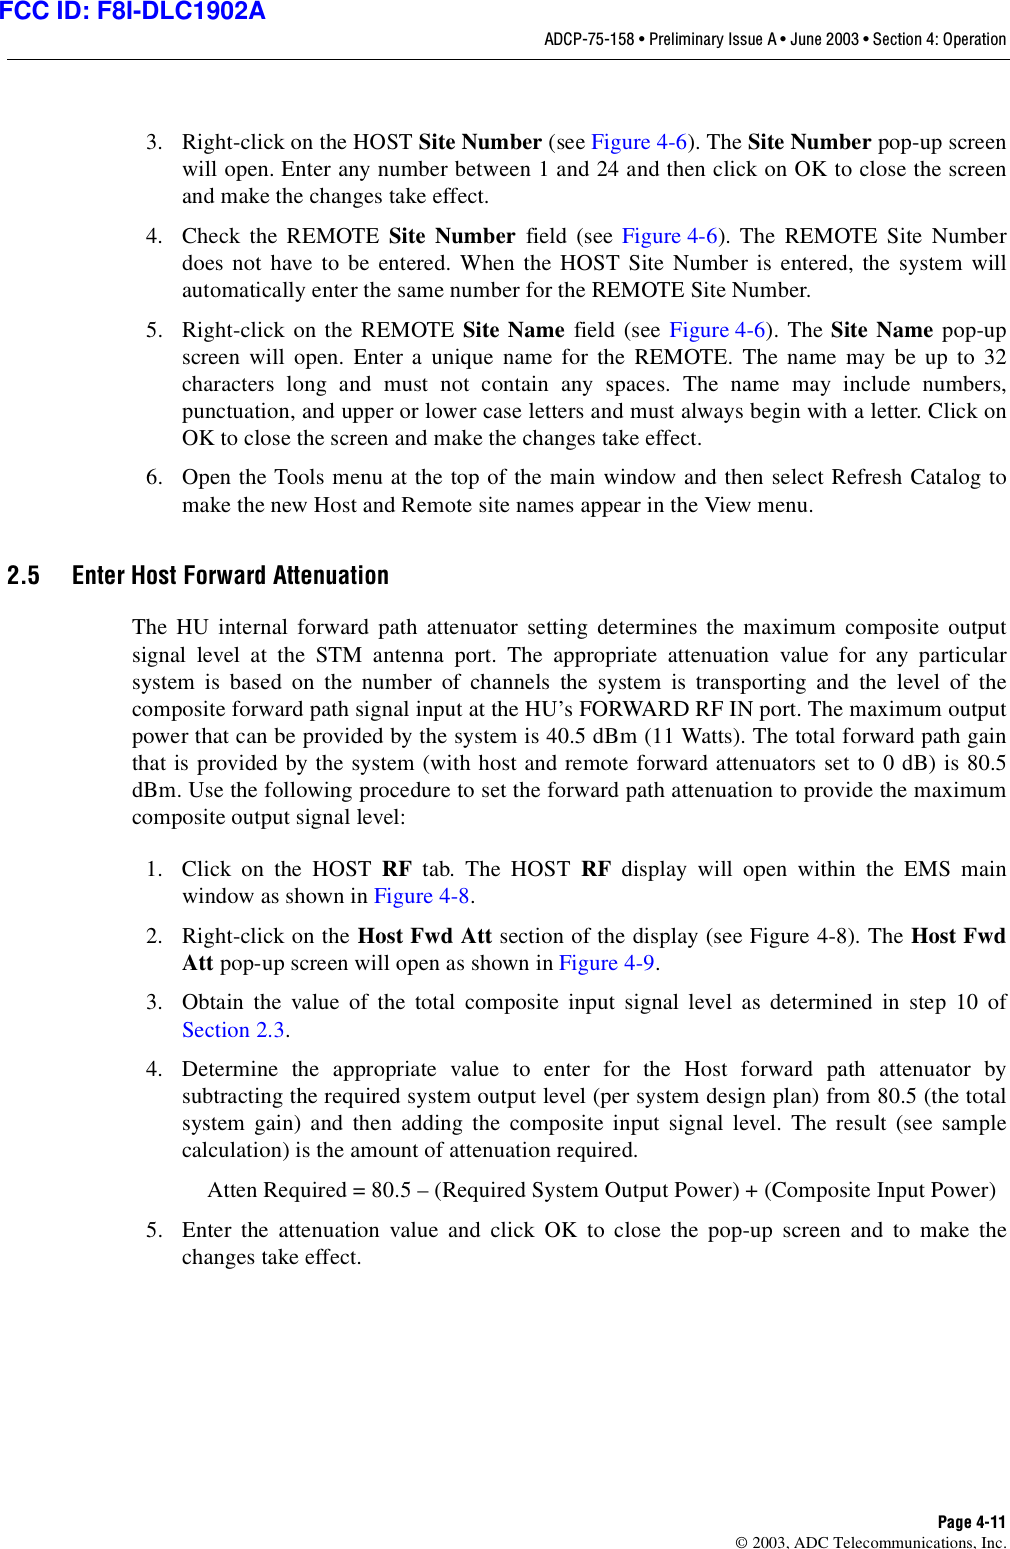 ADCP-75-158 • Preliminary Issue A • June 2003 • Section 4: OperationPage 4-11© 2003, ADC Telecommunications, Inc.3. Right-click on the HOST Site Number (see Figure 4-6). The Site Number pop-up screenwill open. Enter any number between 1 and 24 and then click on OK to close the screenand make the changes take effect. 4. Check the REMOTE Site Number field (see Figure 4-6). The REMOTE Site Numberdoes not have to be entered. When the HOST Site Number is entered, the system willautomatically enter the same number for the REMOTE Site Number. 5. Right-click on the REMOTE Site Name field (see Figure 4-6). The Site Name pop-upscreen will open. Enter a unique name for the REMOTE. The name may be up to 32characters long and must not contain any spaces. The name may include numbers,punctuation, and upper or lower case letters and must always begin with a letter. Click onOK to close the screen and make the changes take effect. 6. Open the Tools menu at the top of the main window and then select Refresh Catalog tomake the new Host and Remote site names appear in the View menu. 2.5 Enter Host Forward AttenuationThe HU internal forward path attenuator setting determines the maximum composite outputsignal level at the STM antenna port. The appropriate attenuation value for any particularsystem is based on the number of channels the system is transporting and the level of thecomposite forward path signal input at the HU’s FORWARD RF IN port. The maximum outputpower that can be provided by the system is 40.5 dBm (11 Watts). The total forward path gainthat is provided by the system (with host and remote forward attenuators set to 0 dB) is 80.5dBm. Use the following procedure to set the forward path attenuation to provide the maximumcomposite output signal level: 1. Click on the HOST RF tab. The HOST RF display will open within the EMS mainwindow as shown in Figure 4-8. 2. Right-click on the Host Fwd Att section of the display (see Figure 4-8). The Host FwdAtt pop-up screen will open as shown in Figure 4-9. 3. Obtain the value of the total composite input signal level as determined in step 10 ofSection 2.3. 4. Determine the appropriate value to enter for the Host forward path attenuator bysubtracting the required system output level (per system design plan) from 80.5 (the totalsystem gain) and then adding the composite input signal level. The result (see samplecalculation) is the amount of attenuation required. Atten Required = 80.5 – (Required System Output Power) + (Composite Input Power)5. Enter the attenuation value and click OK to close the pop-up screen and to make thechanges take effect. FCC ID: F8I-DLC1902A